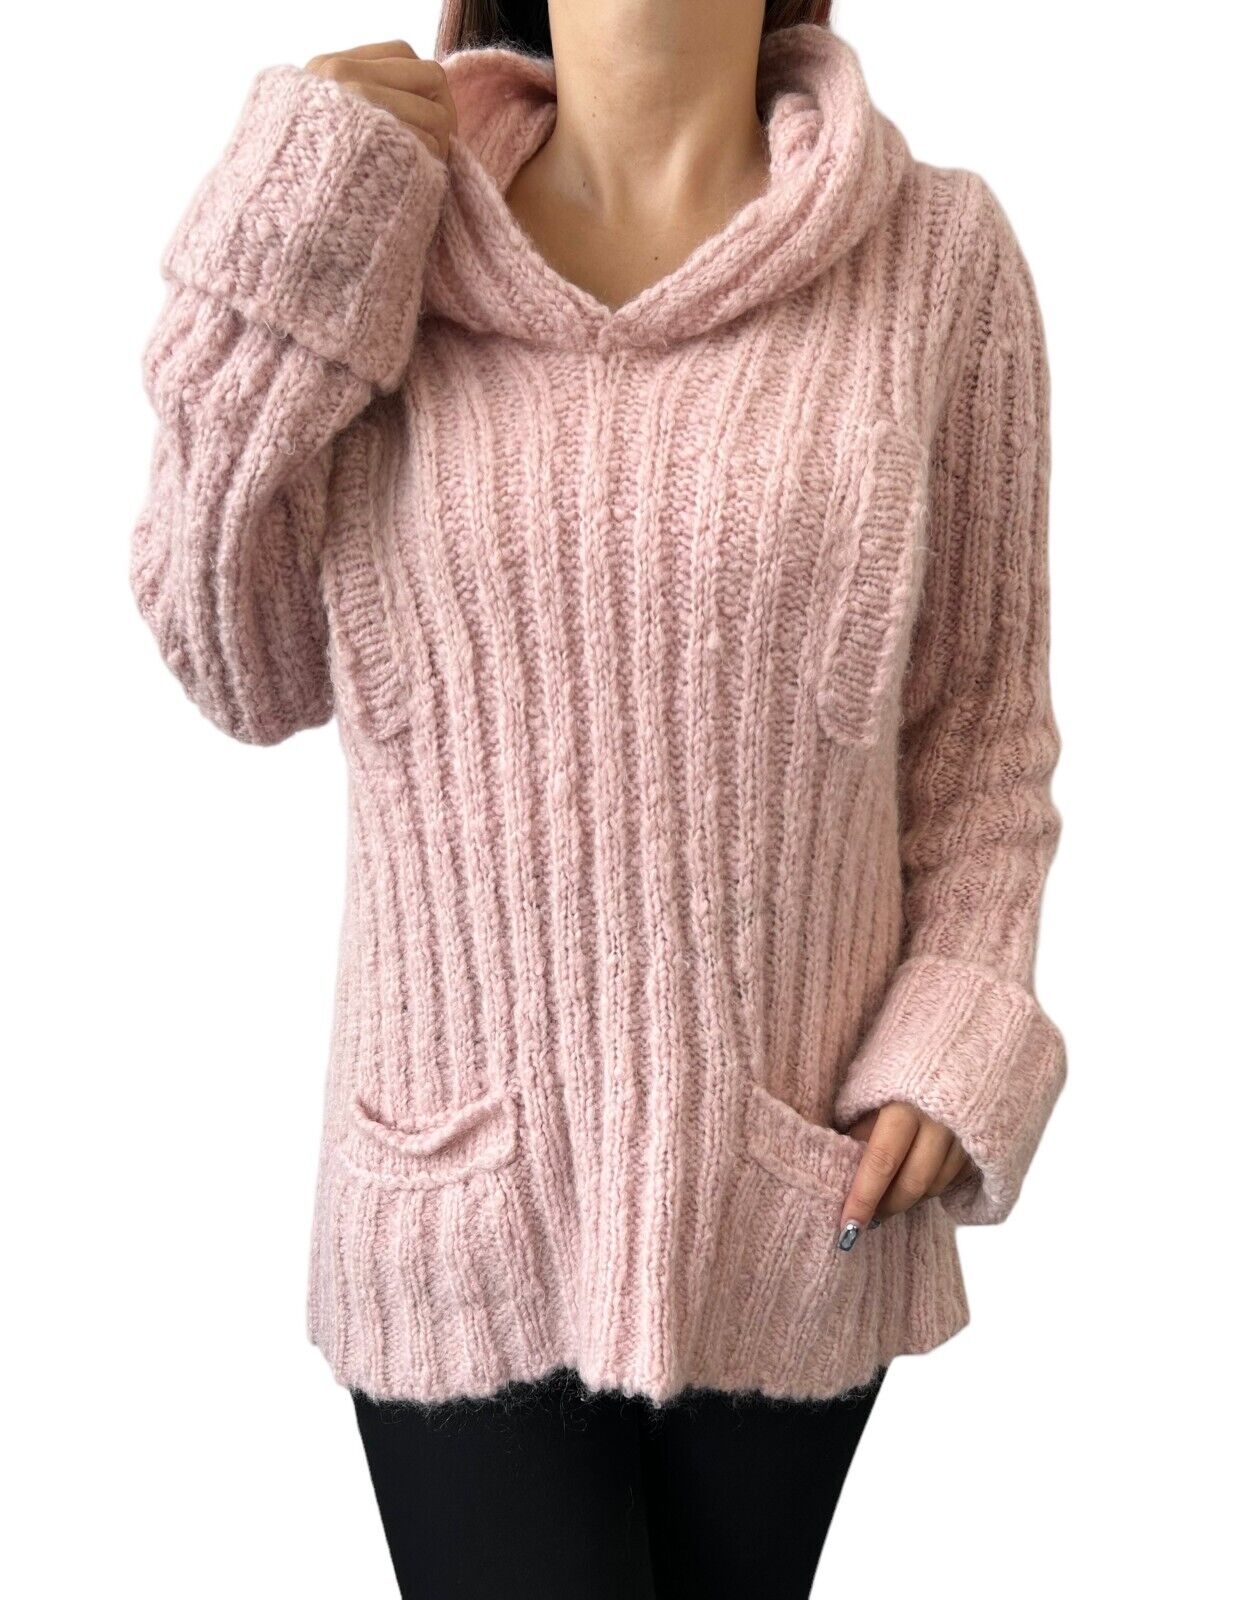 CHANEL Vintage 04A Logo Sweater Top #38 Knit Pink Wool Mohair Rank AB